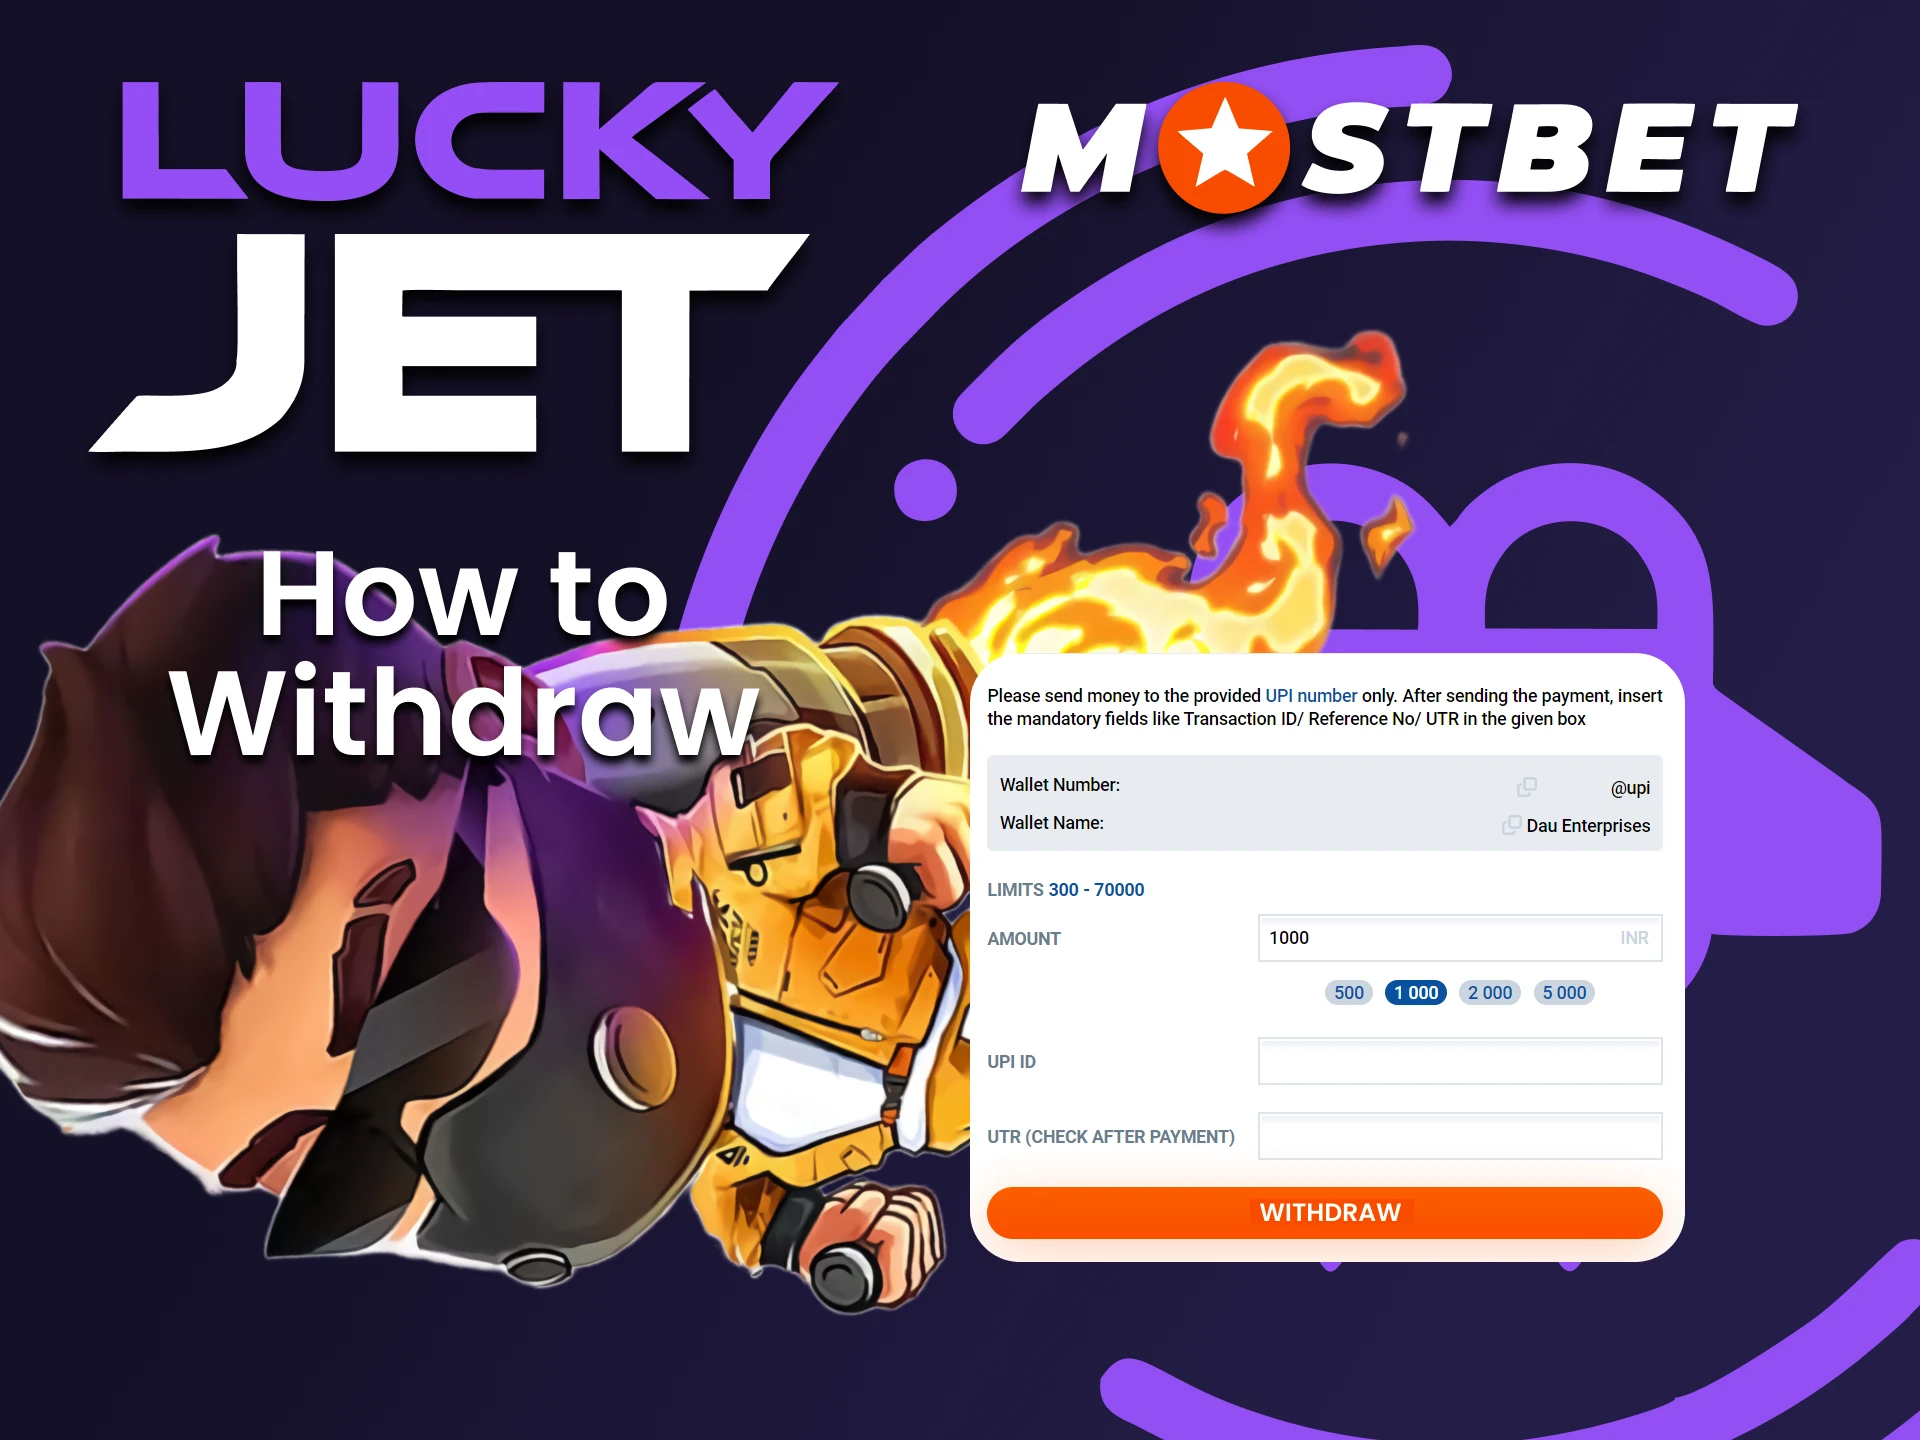 Withdraw your winnings in Lucky Jet by Mostbet.